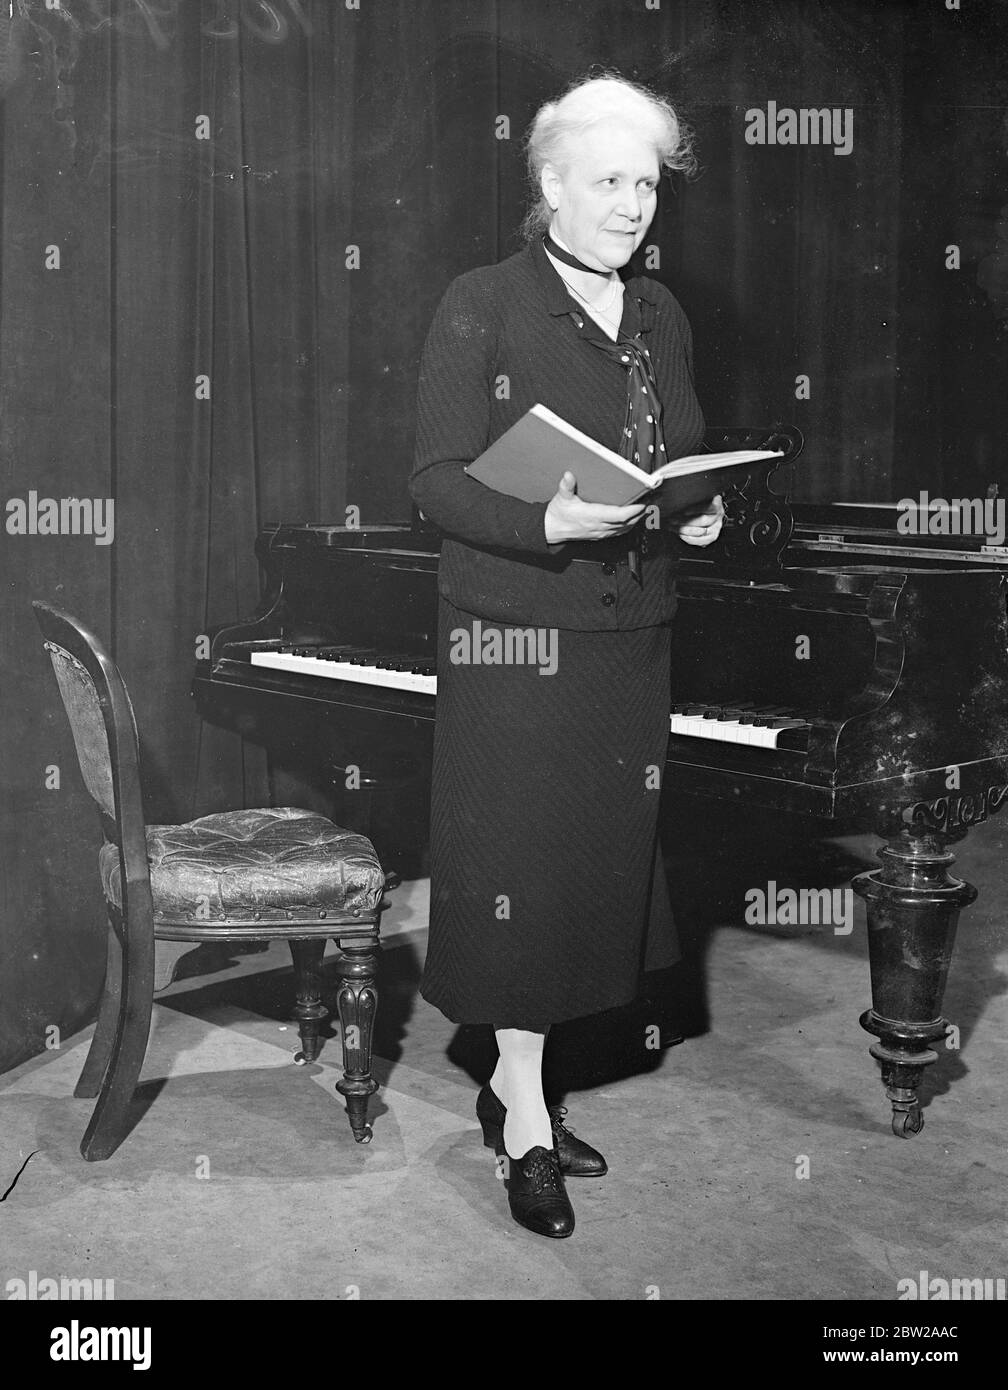 Austrian woman authority on opera lectures at Sadler's Wells. Official lecturer to the renowned Salzburg Festival, Frau Mitia Mayer Lismann of Austria, is lecturing on Beethoven's opera 'Fidalio' to the Vic Wells Opera company at the Sadlers Wells, Islington, London.. 25 October 1937 Stock Photo